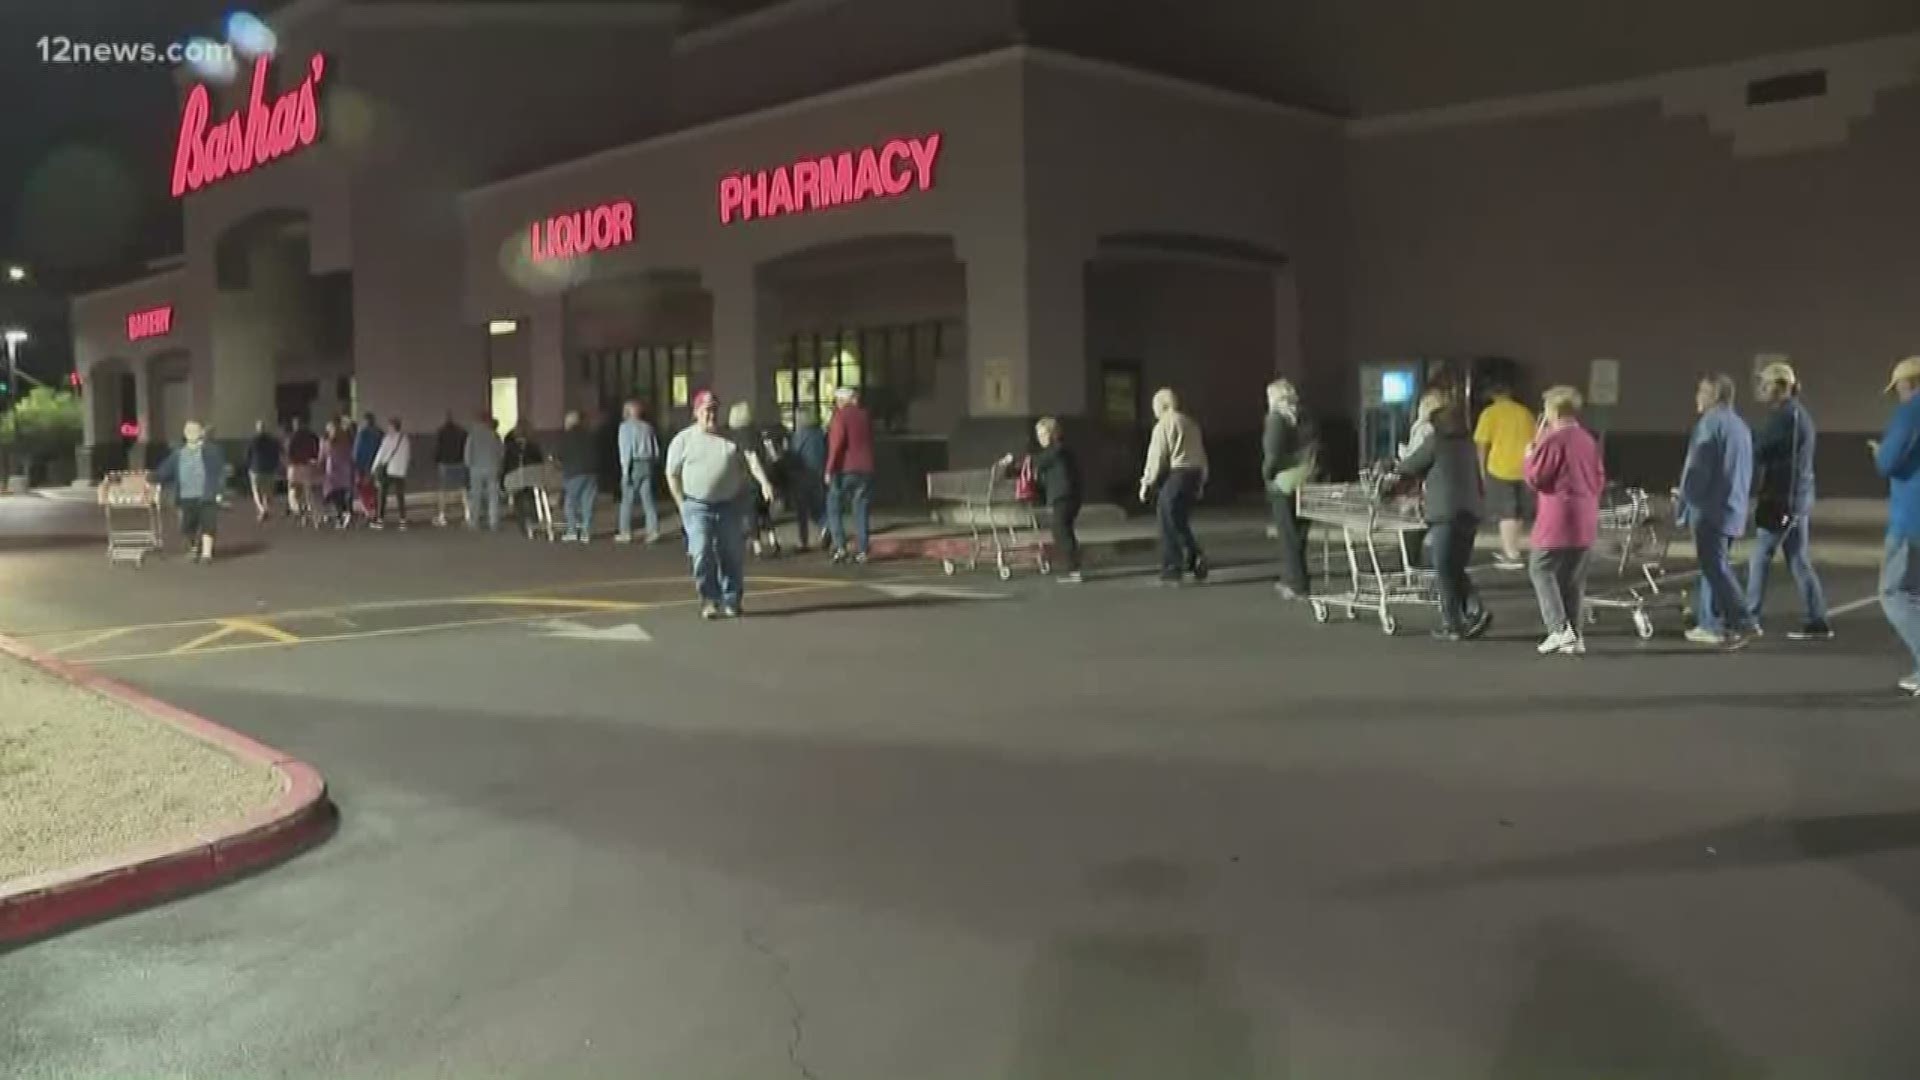 These Valley grocery stores are allowing seniors to come in early and shop amid the coronavirus outbreak. Team 12's Jen Wahl has the latest.